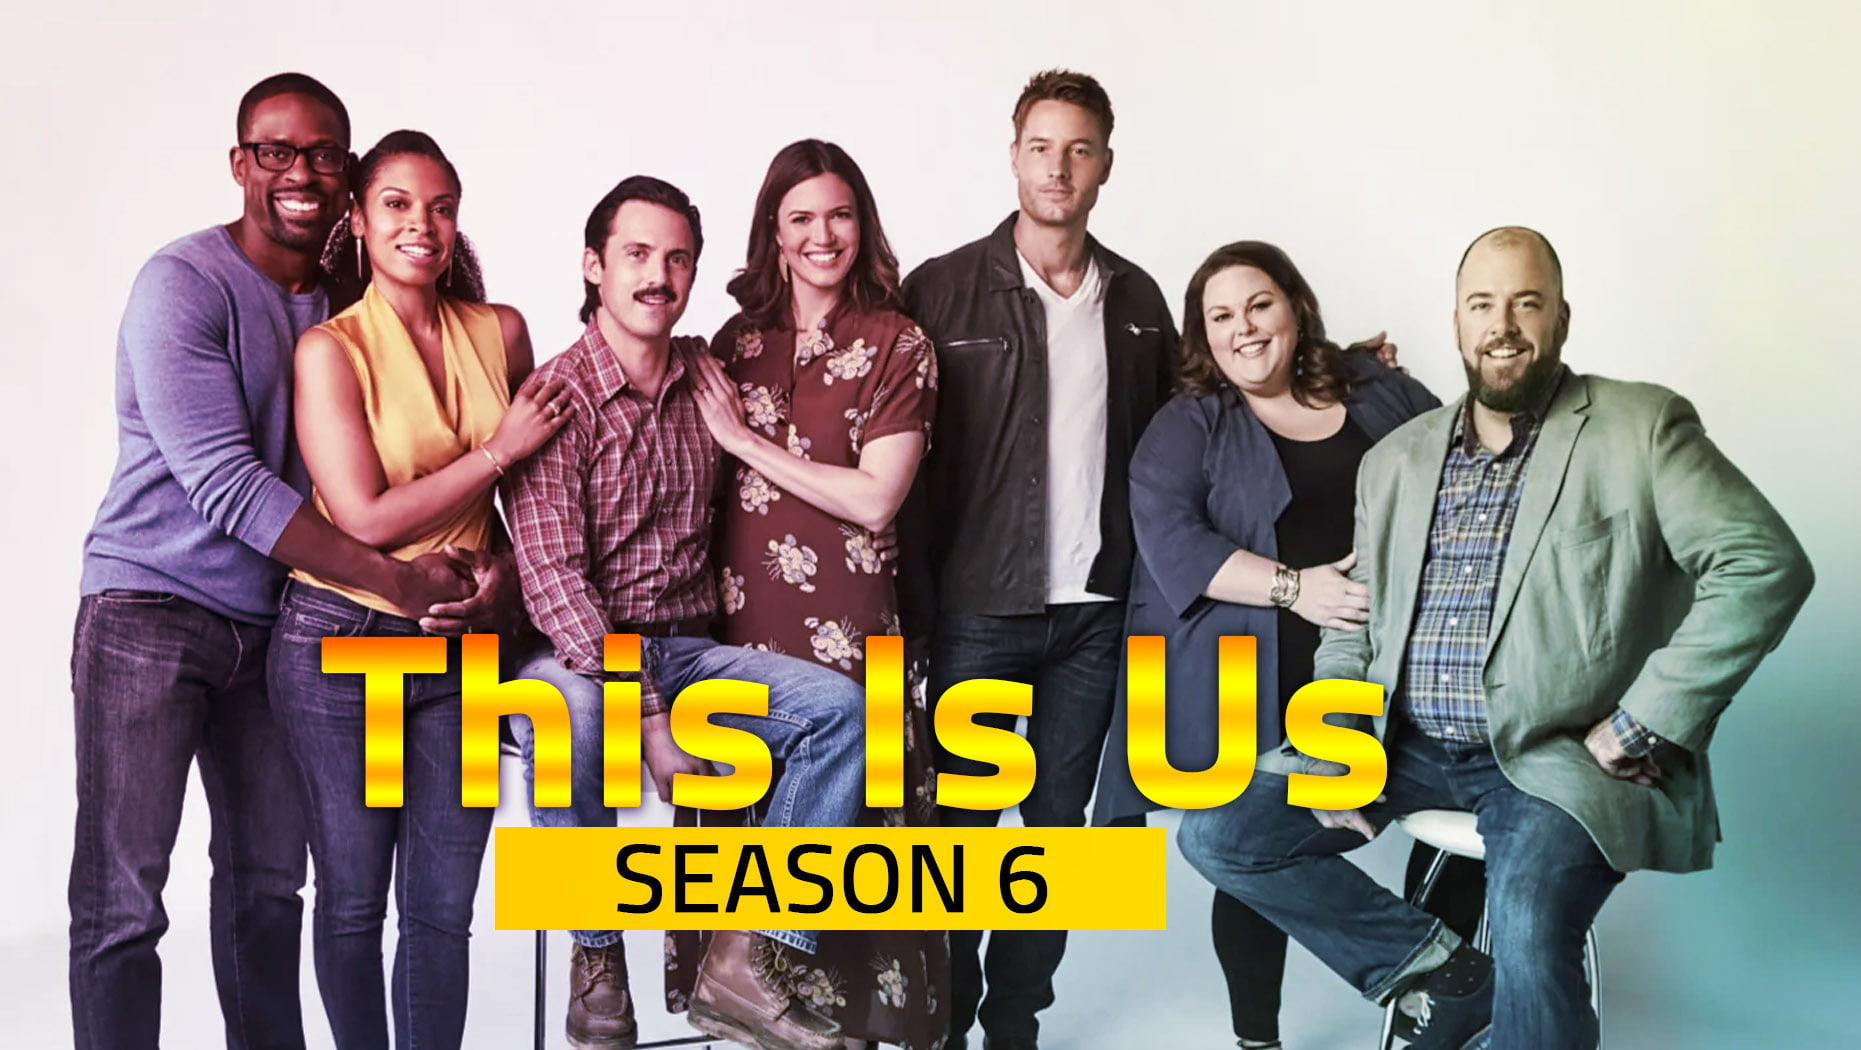 How Many Episodes Are in the Final Season of ‘This Is Us’?